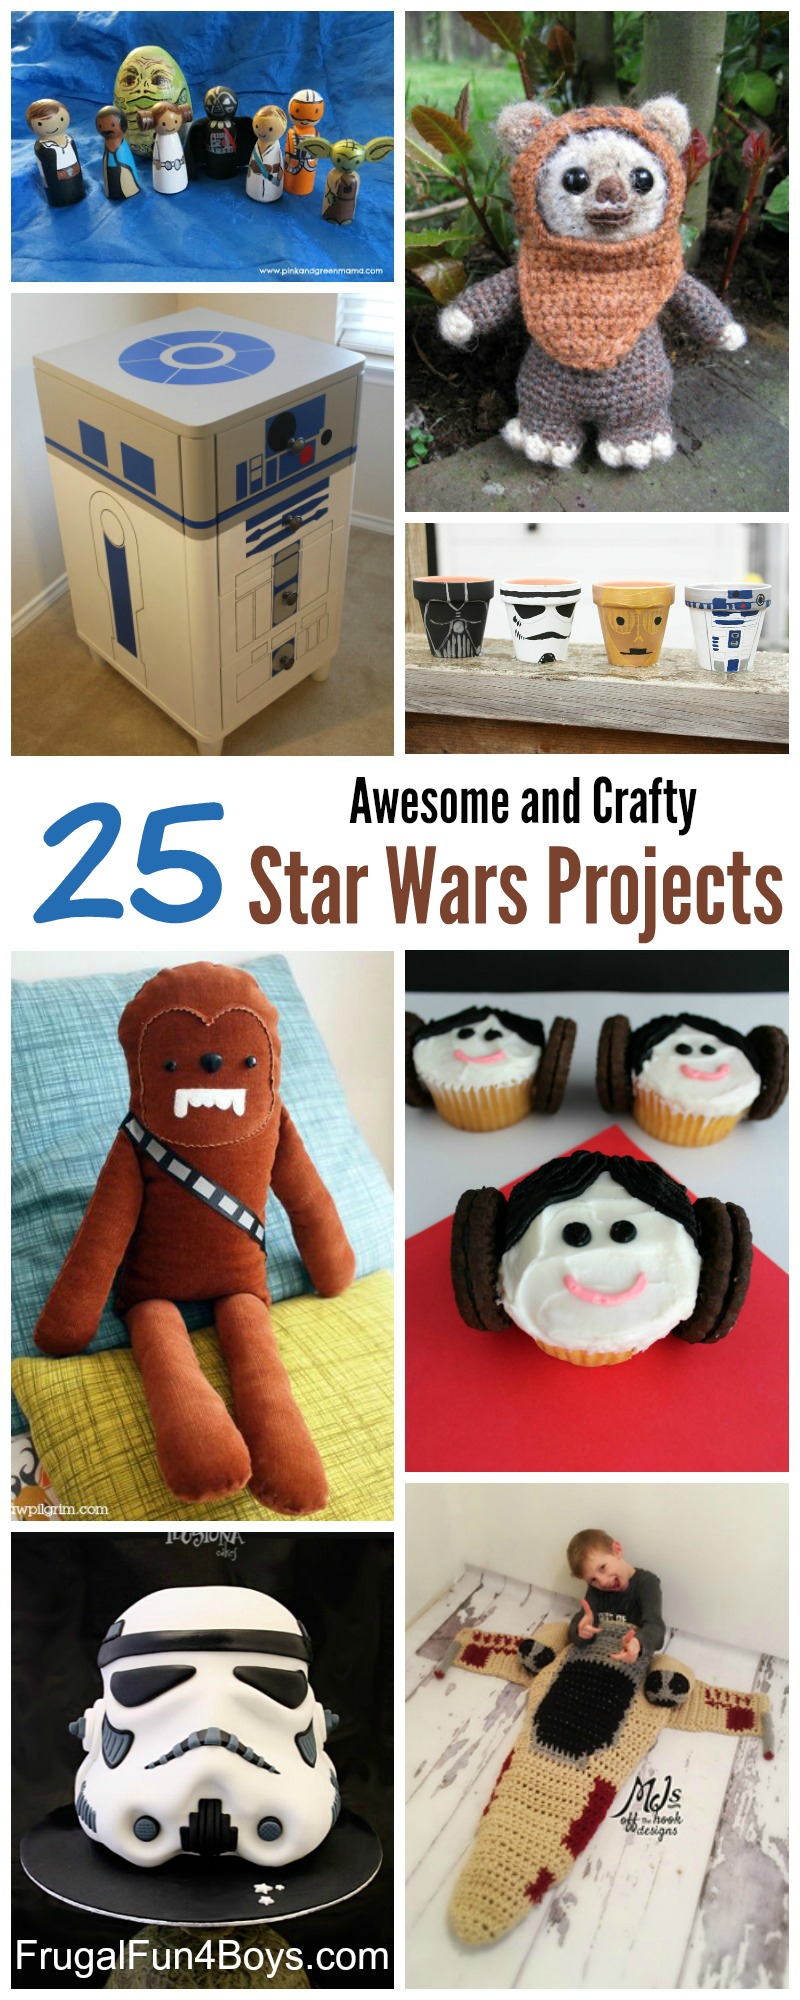 25 Awesome Star Wars Crafts to Make